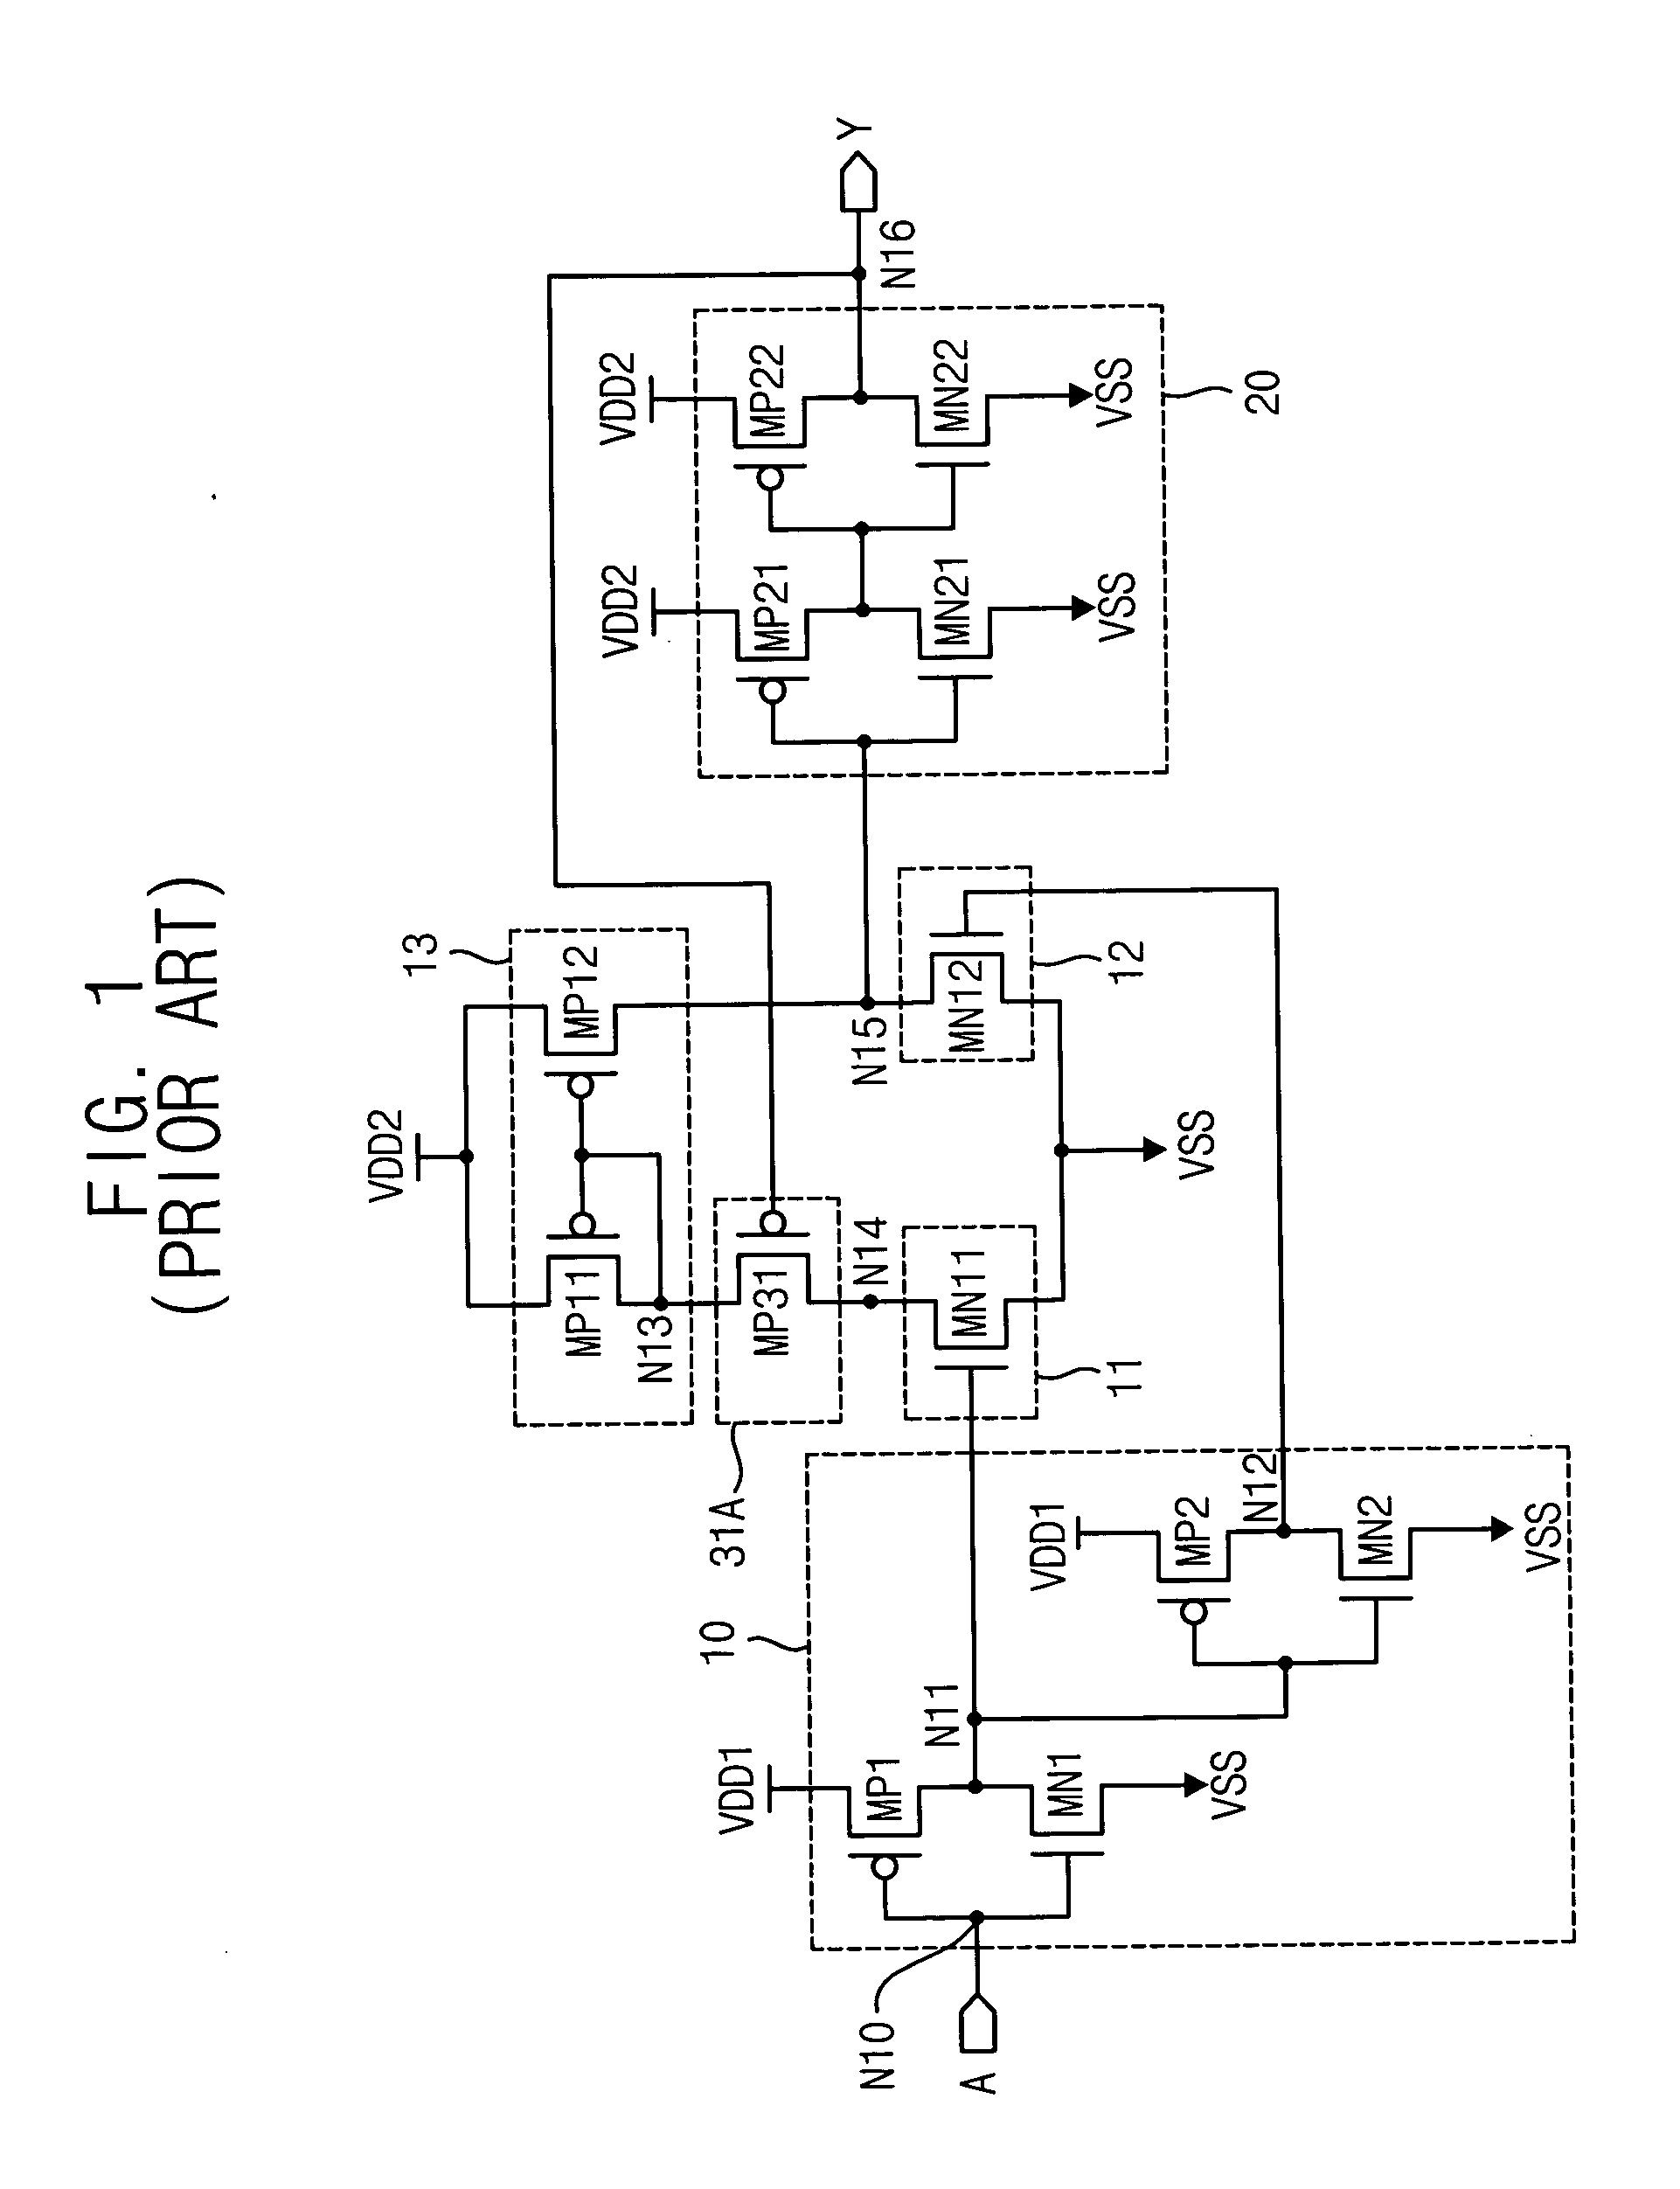 Digital circuits having current mirrors and reduced leakage current